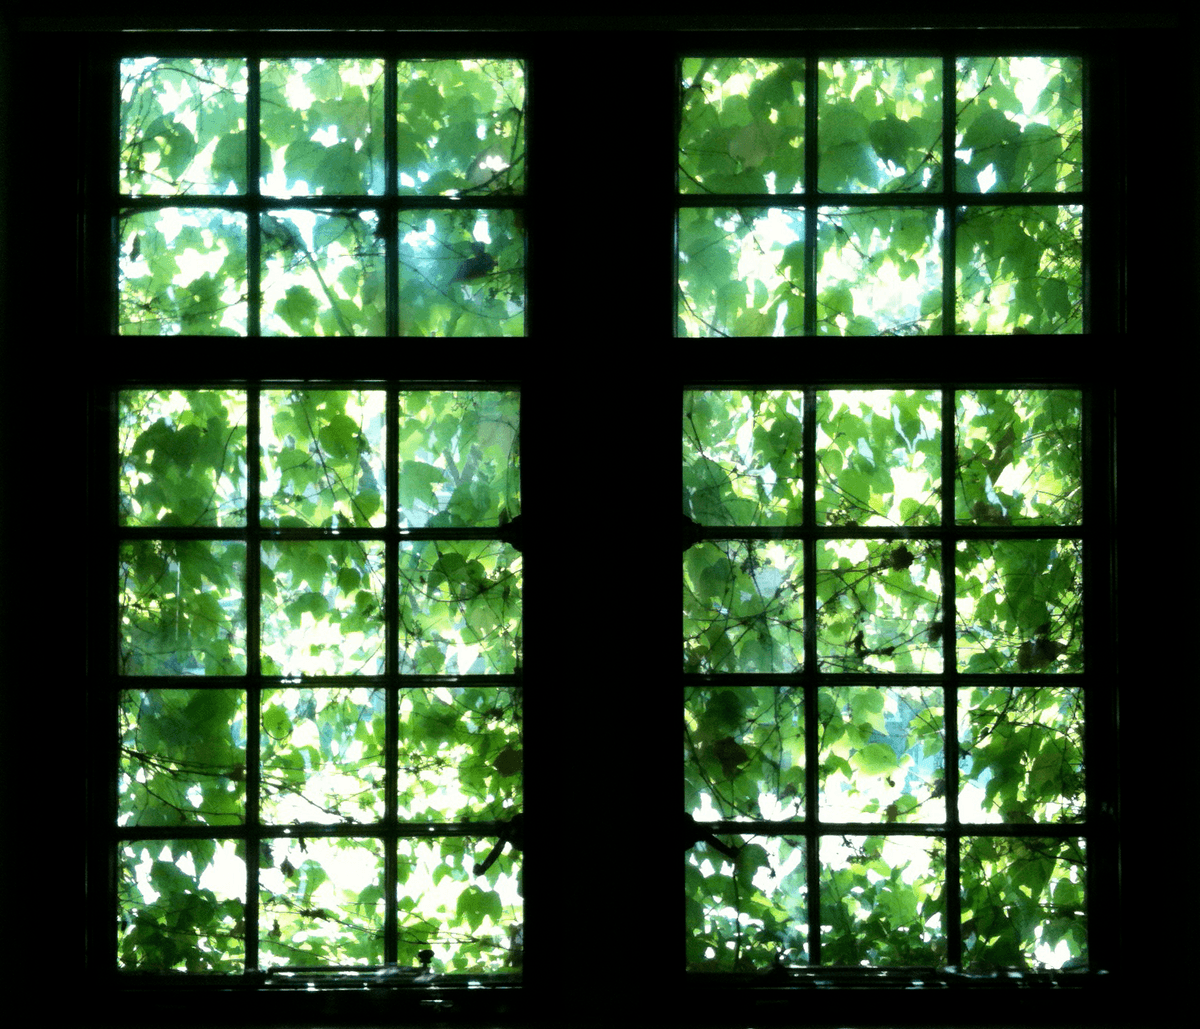 An ivy-covered window overlooking University Avenue